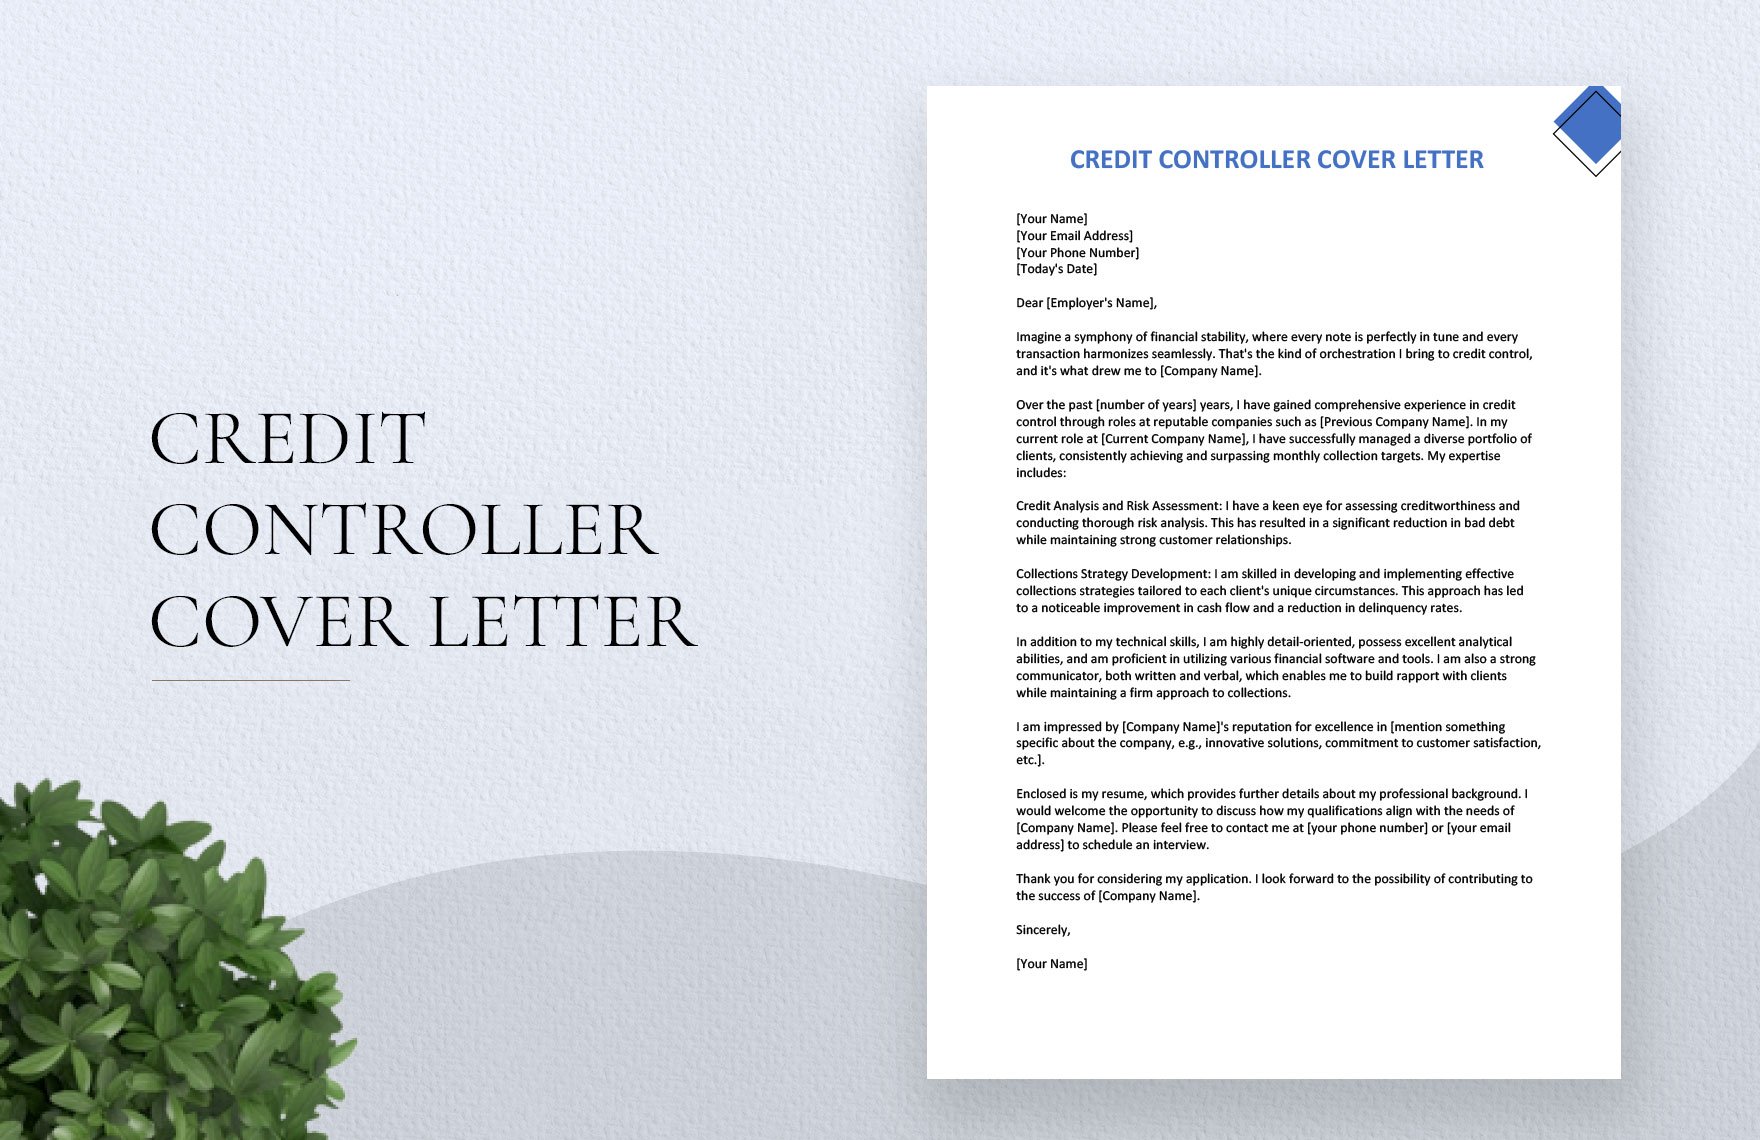 Credit Controller Cover Letter